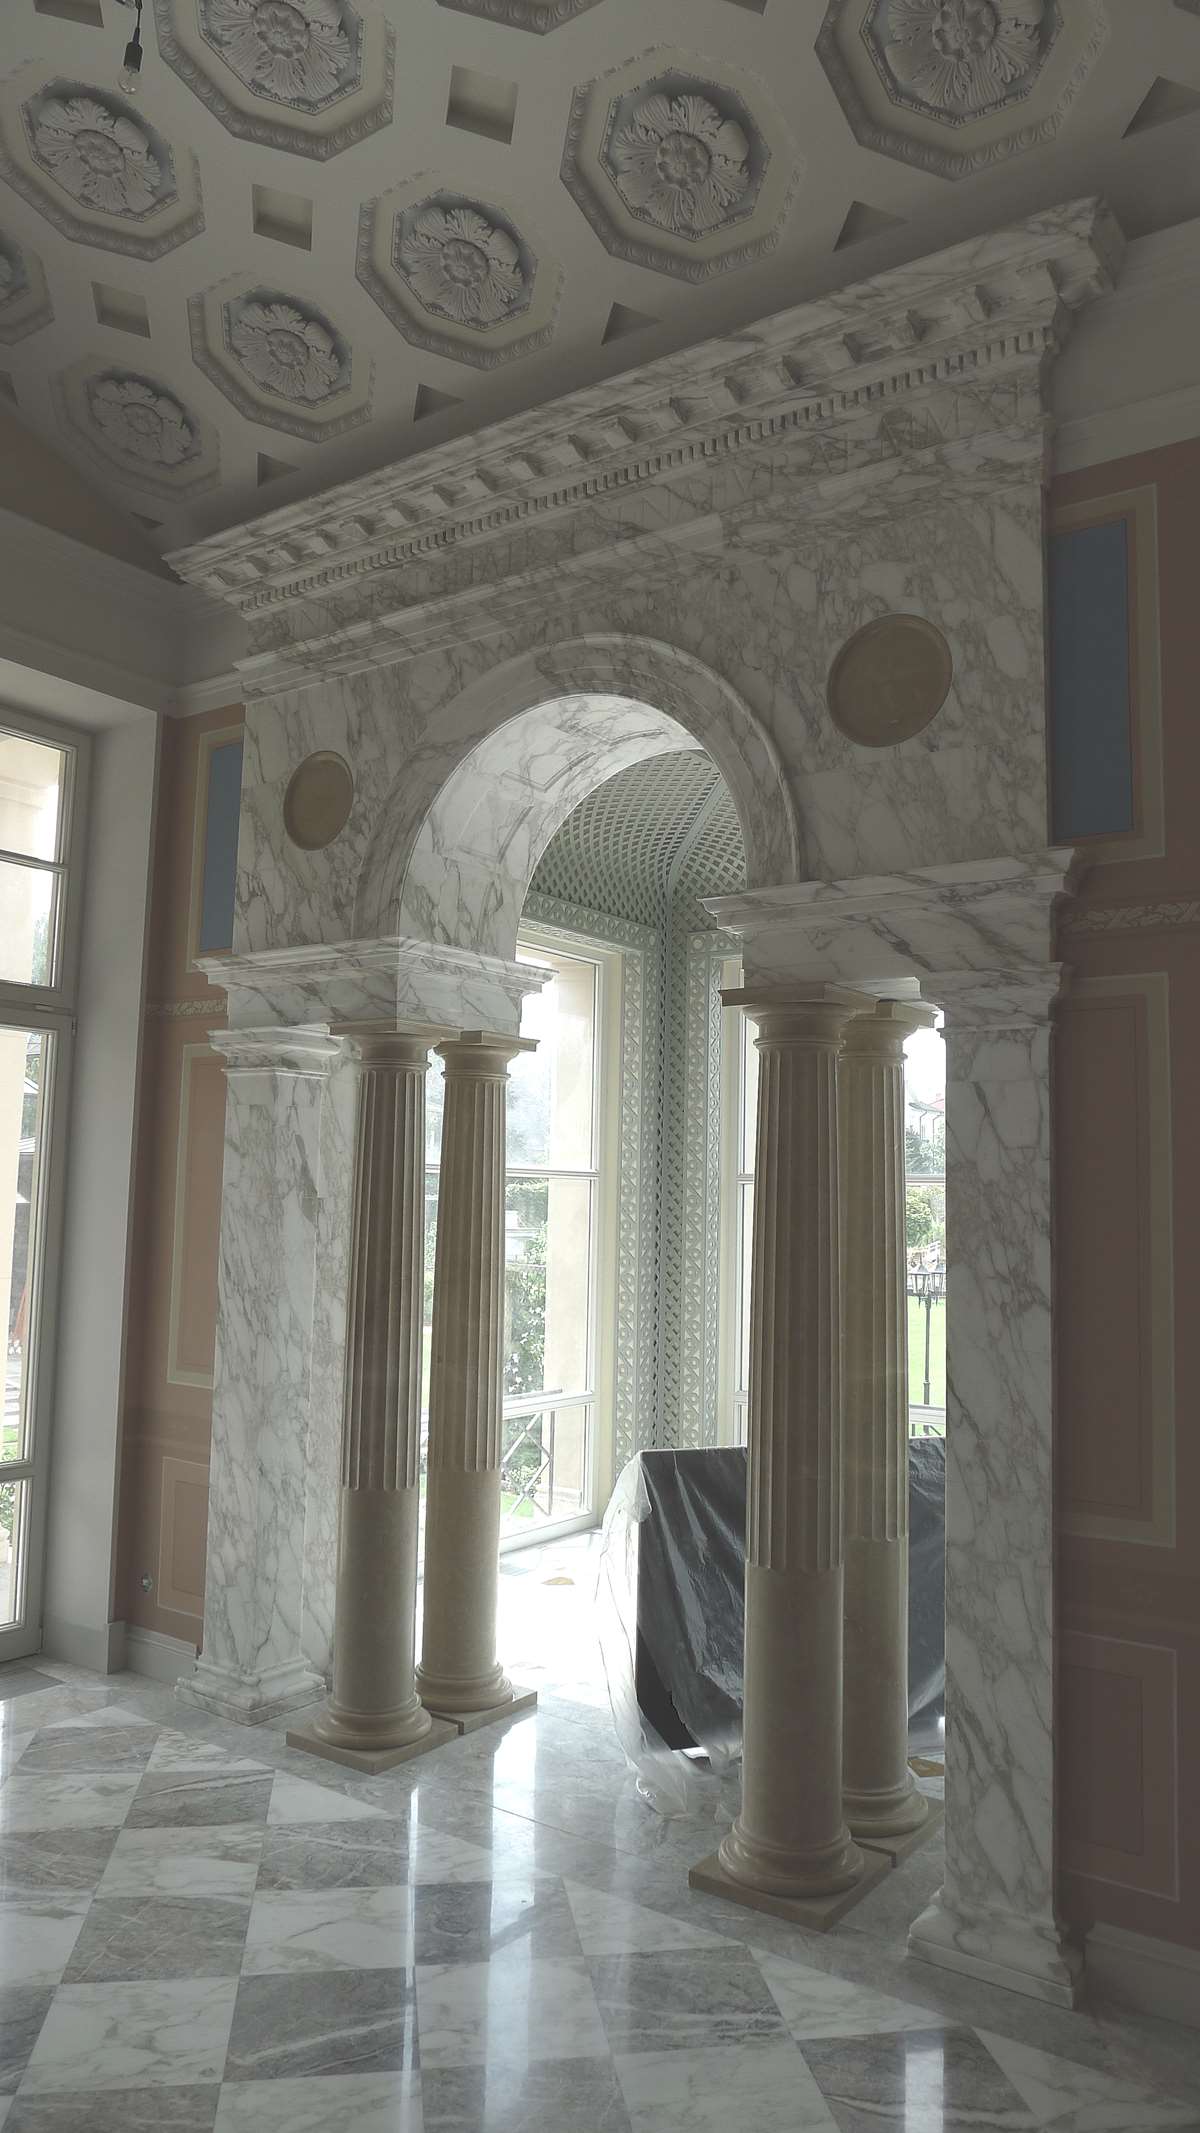 COMPLEX PROJECTS OF NATURAL STONE